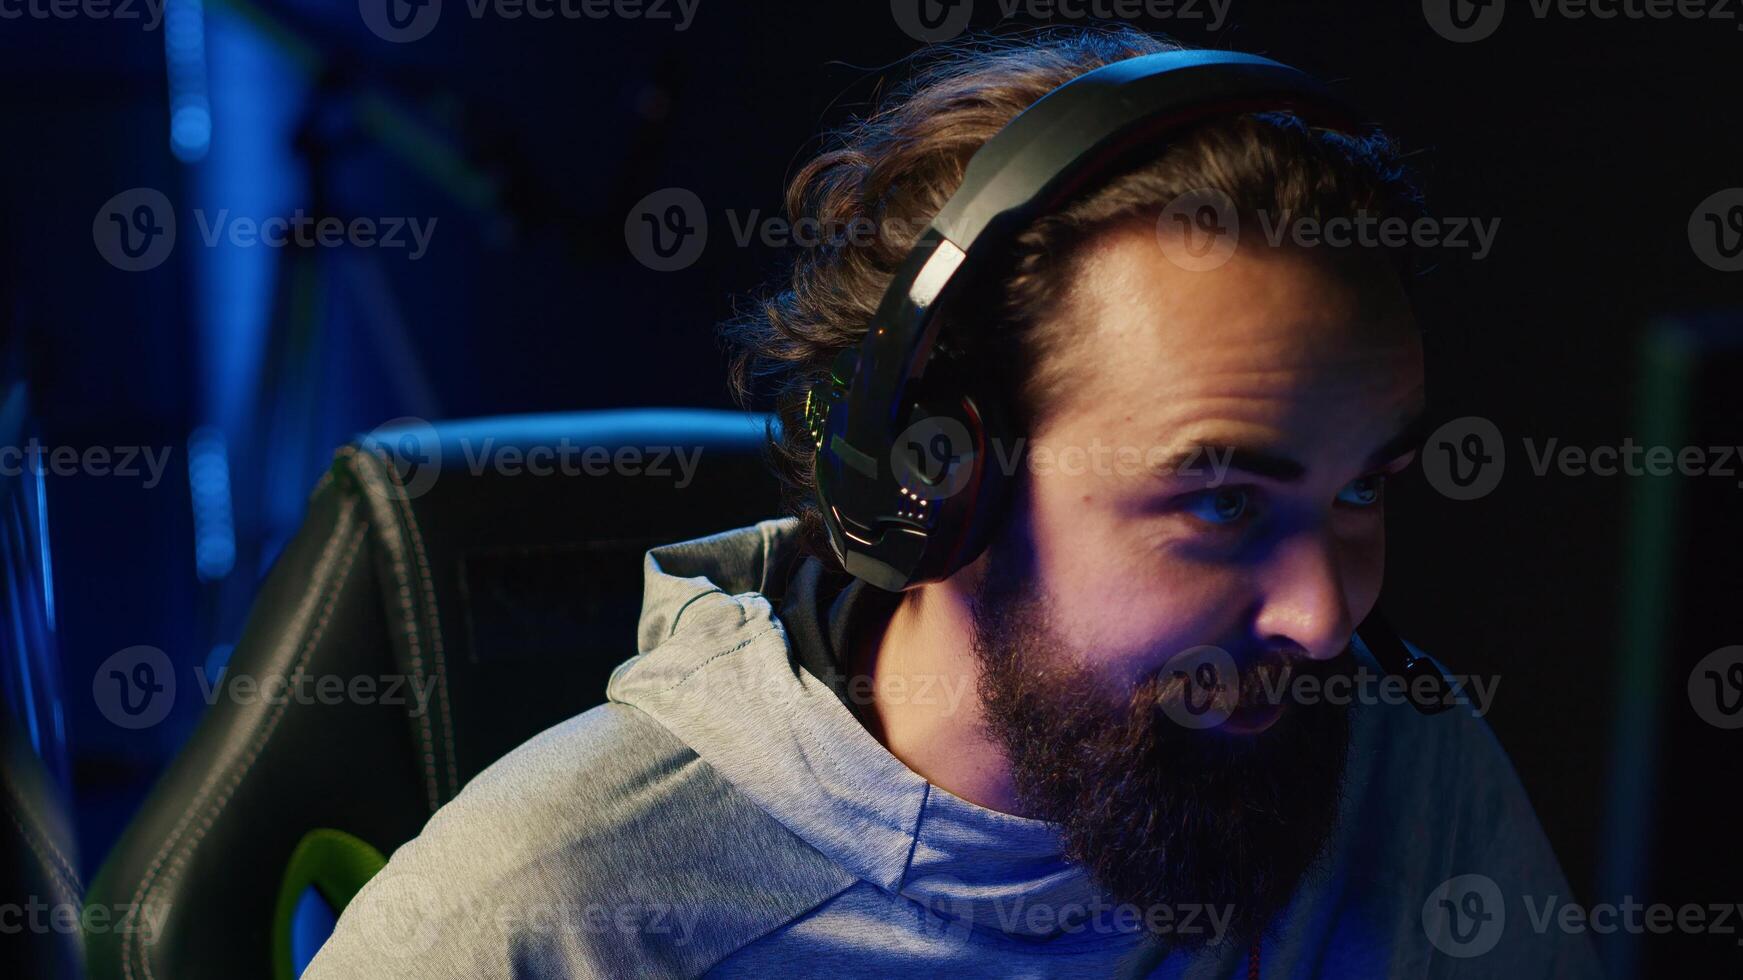 Esports player playing videogames in front of subscribers during livestream, providing knowledgeable commentary during gameplay. Zoom in on professional gamer streaming game in dark studio photo